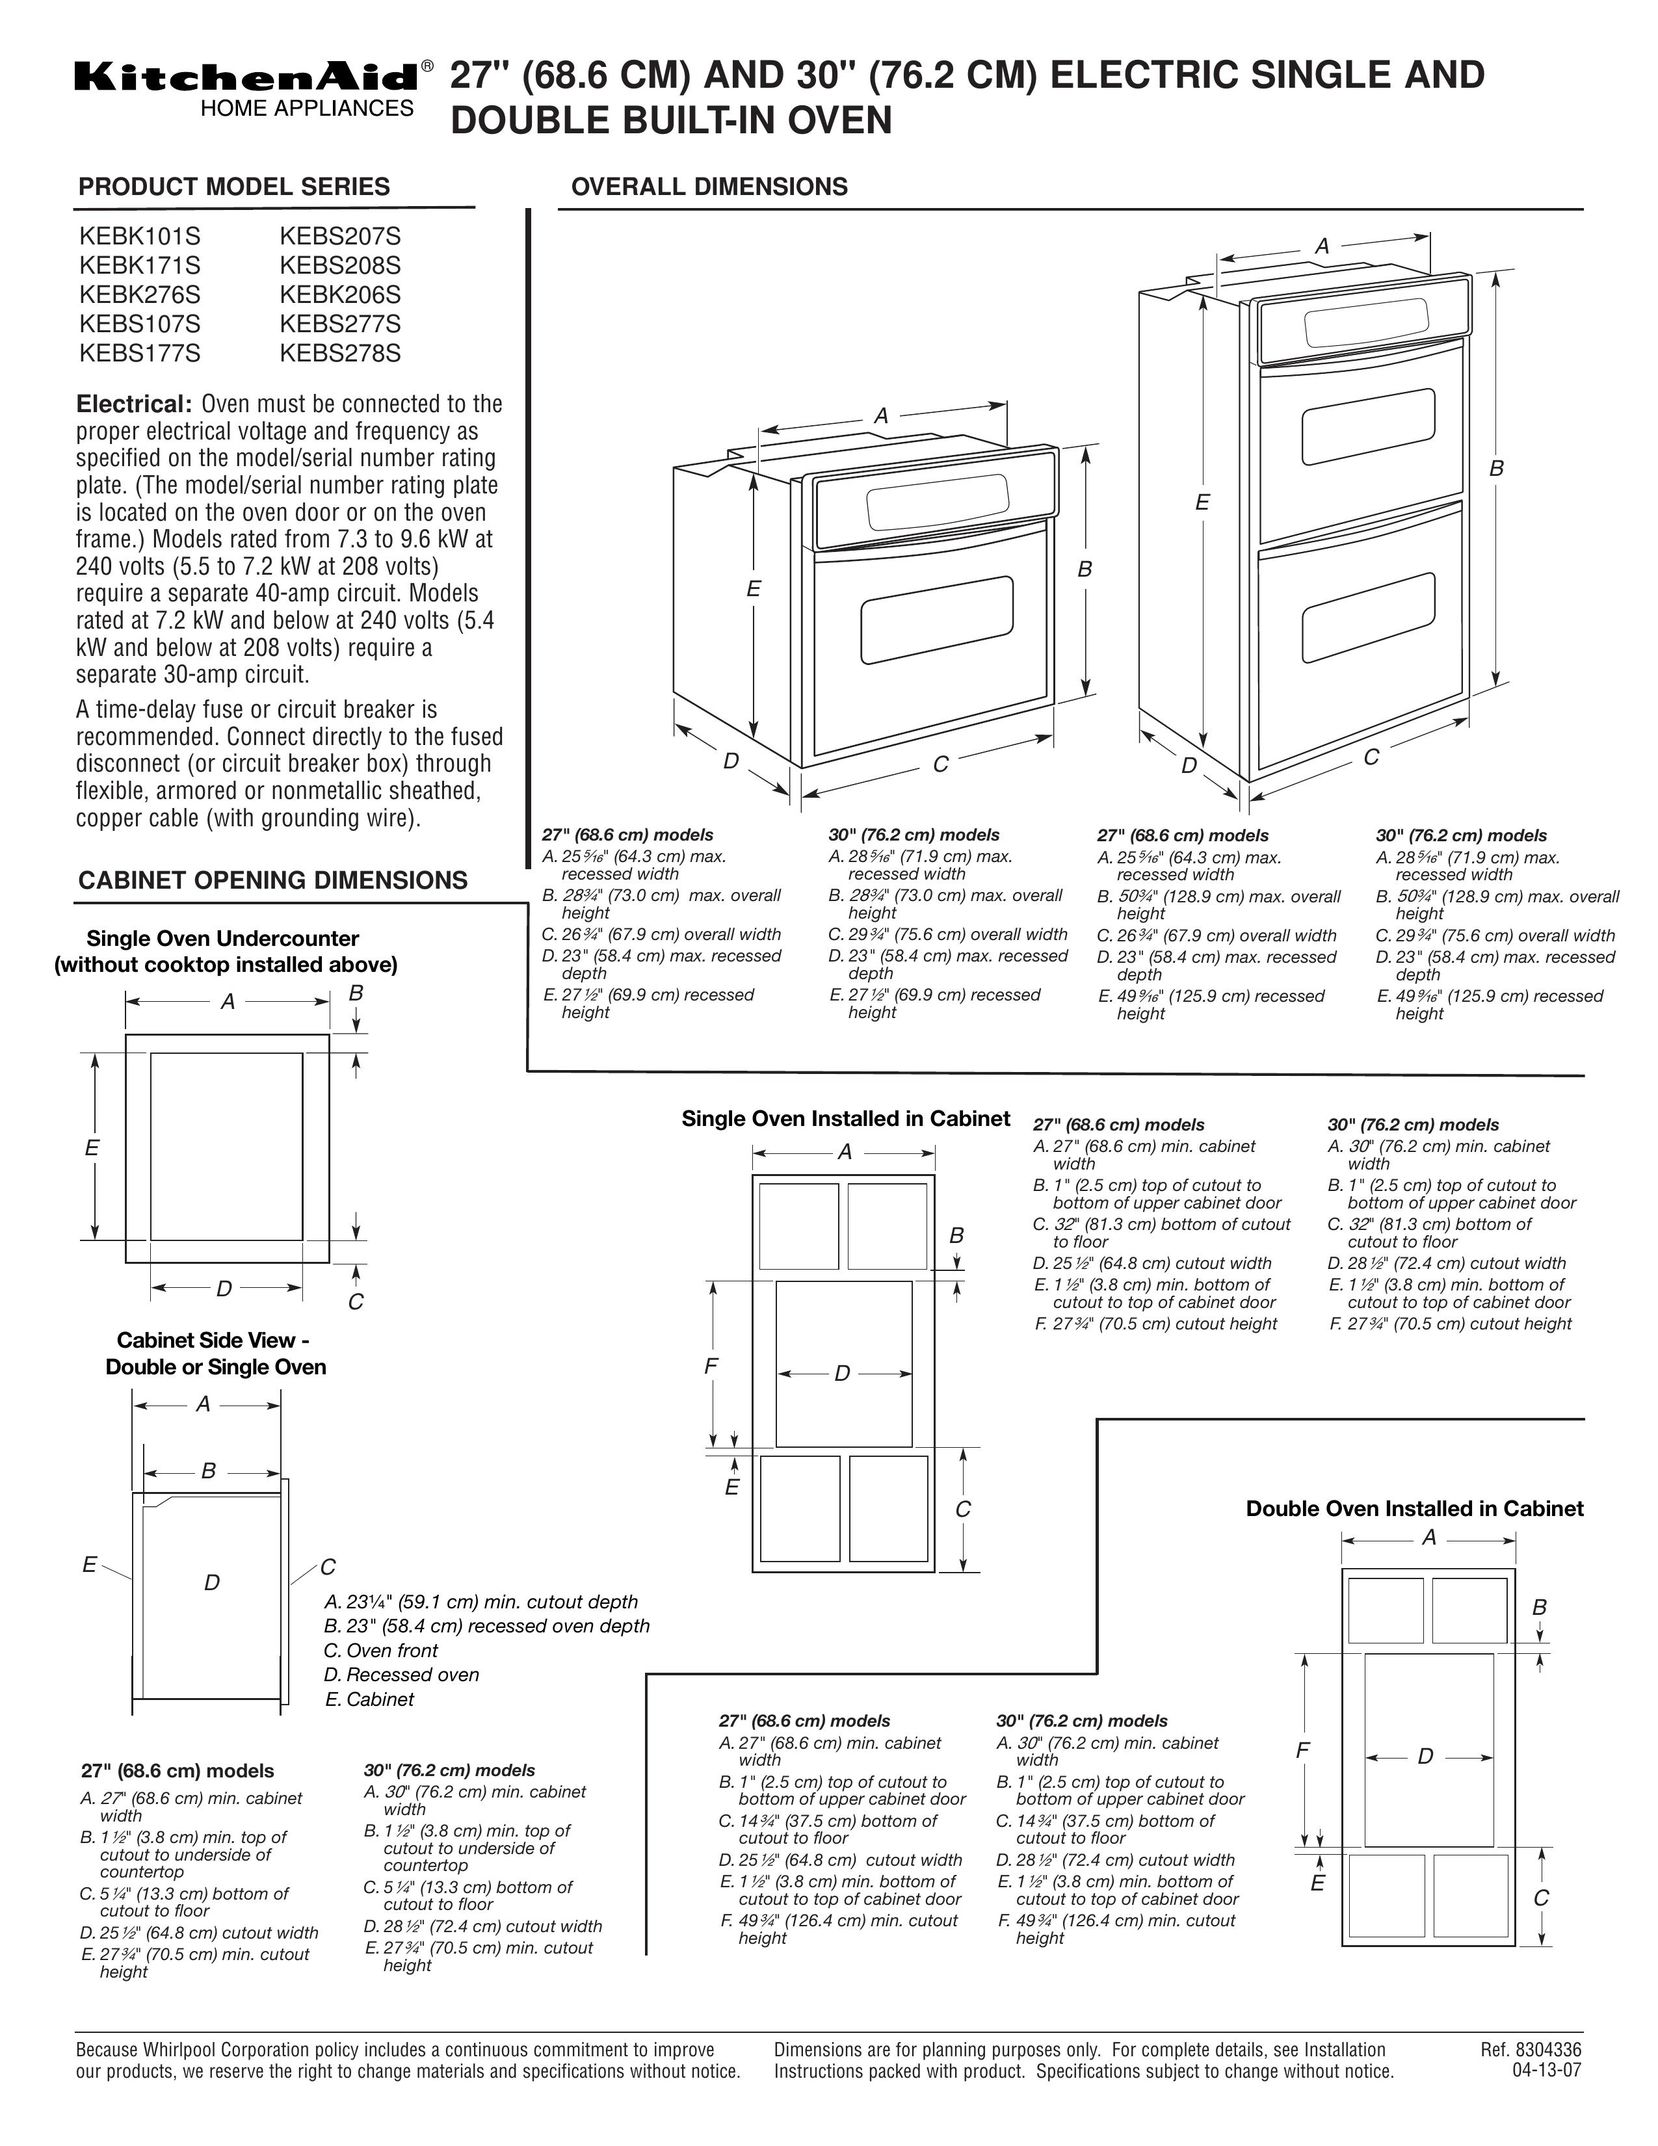 KitchenAid KEBS208S Double Oven User Manual